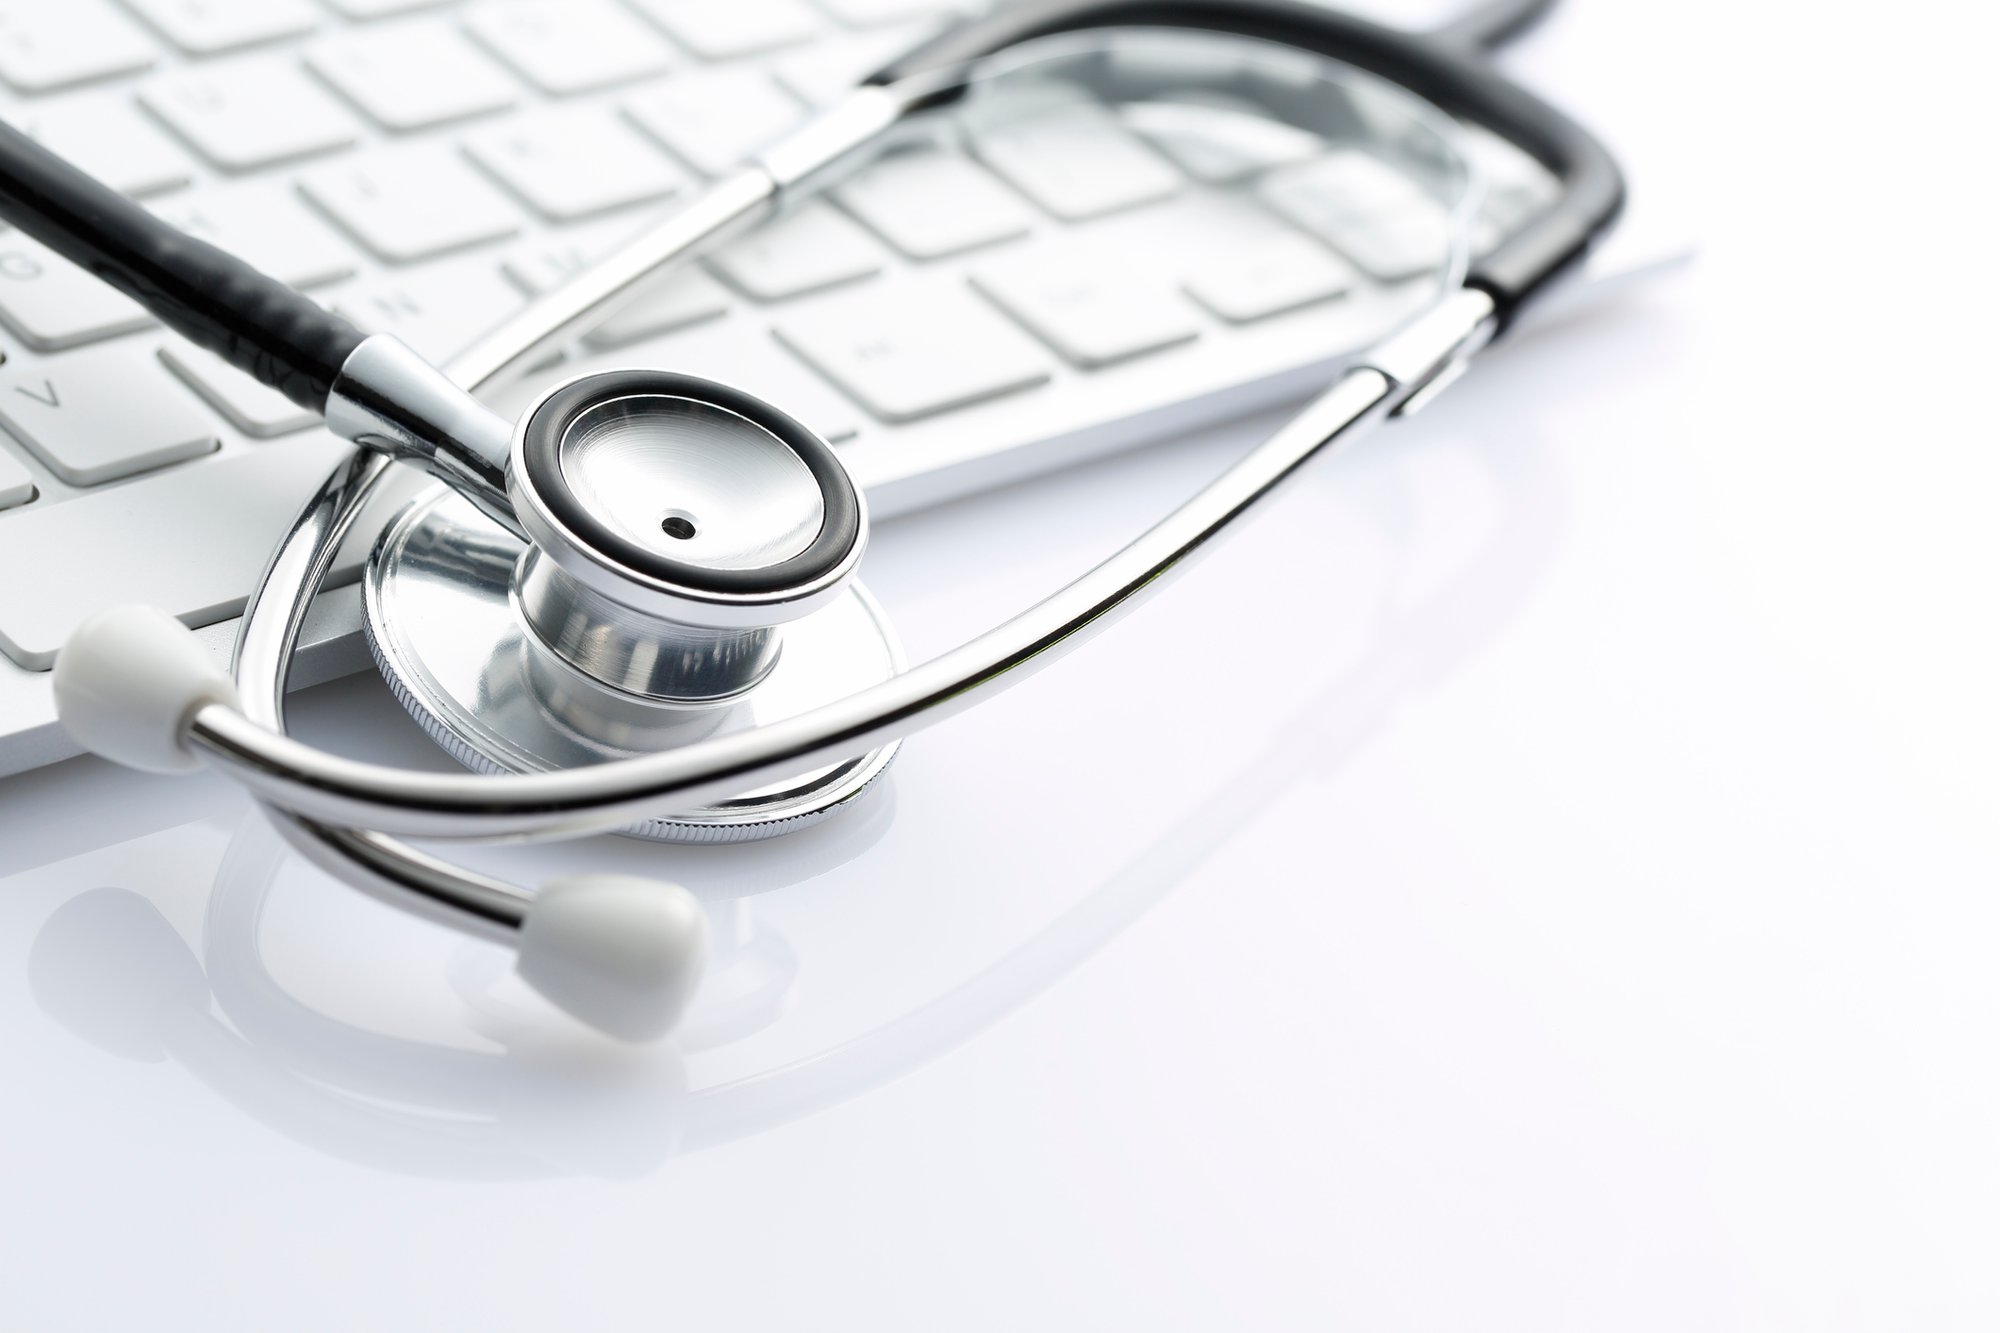 AltaScribe is where technology and patient care meet to ensure the best outcomes for patients.